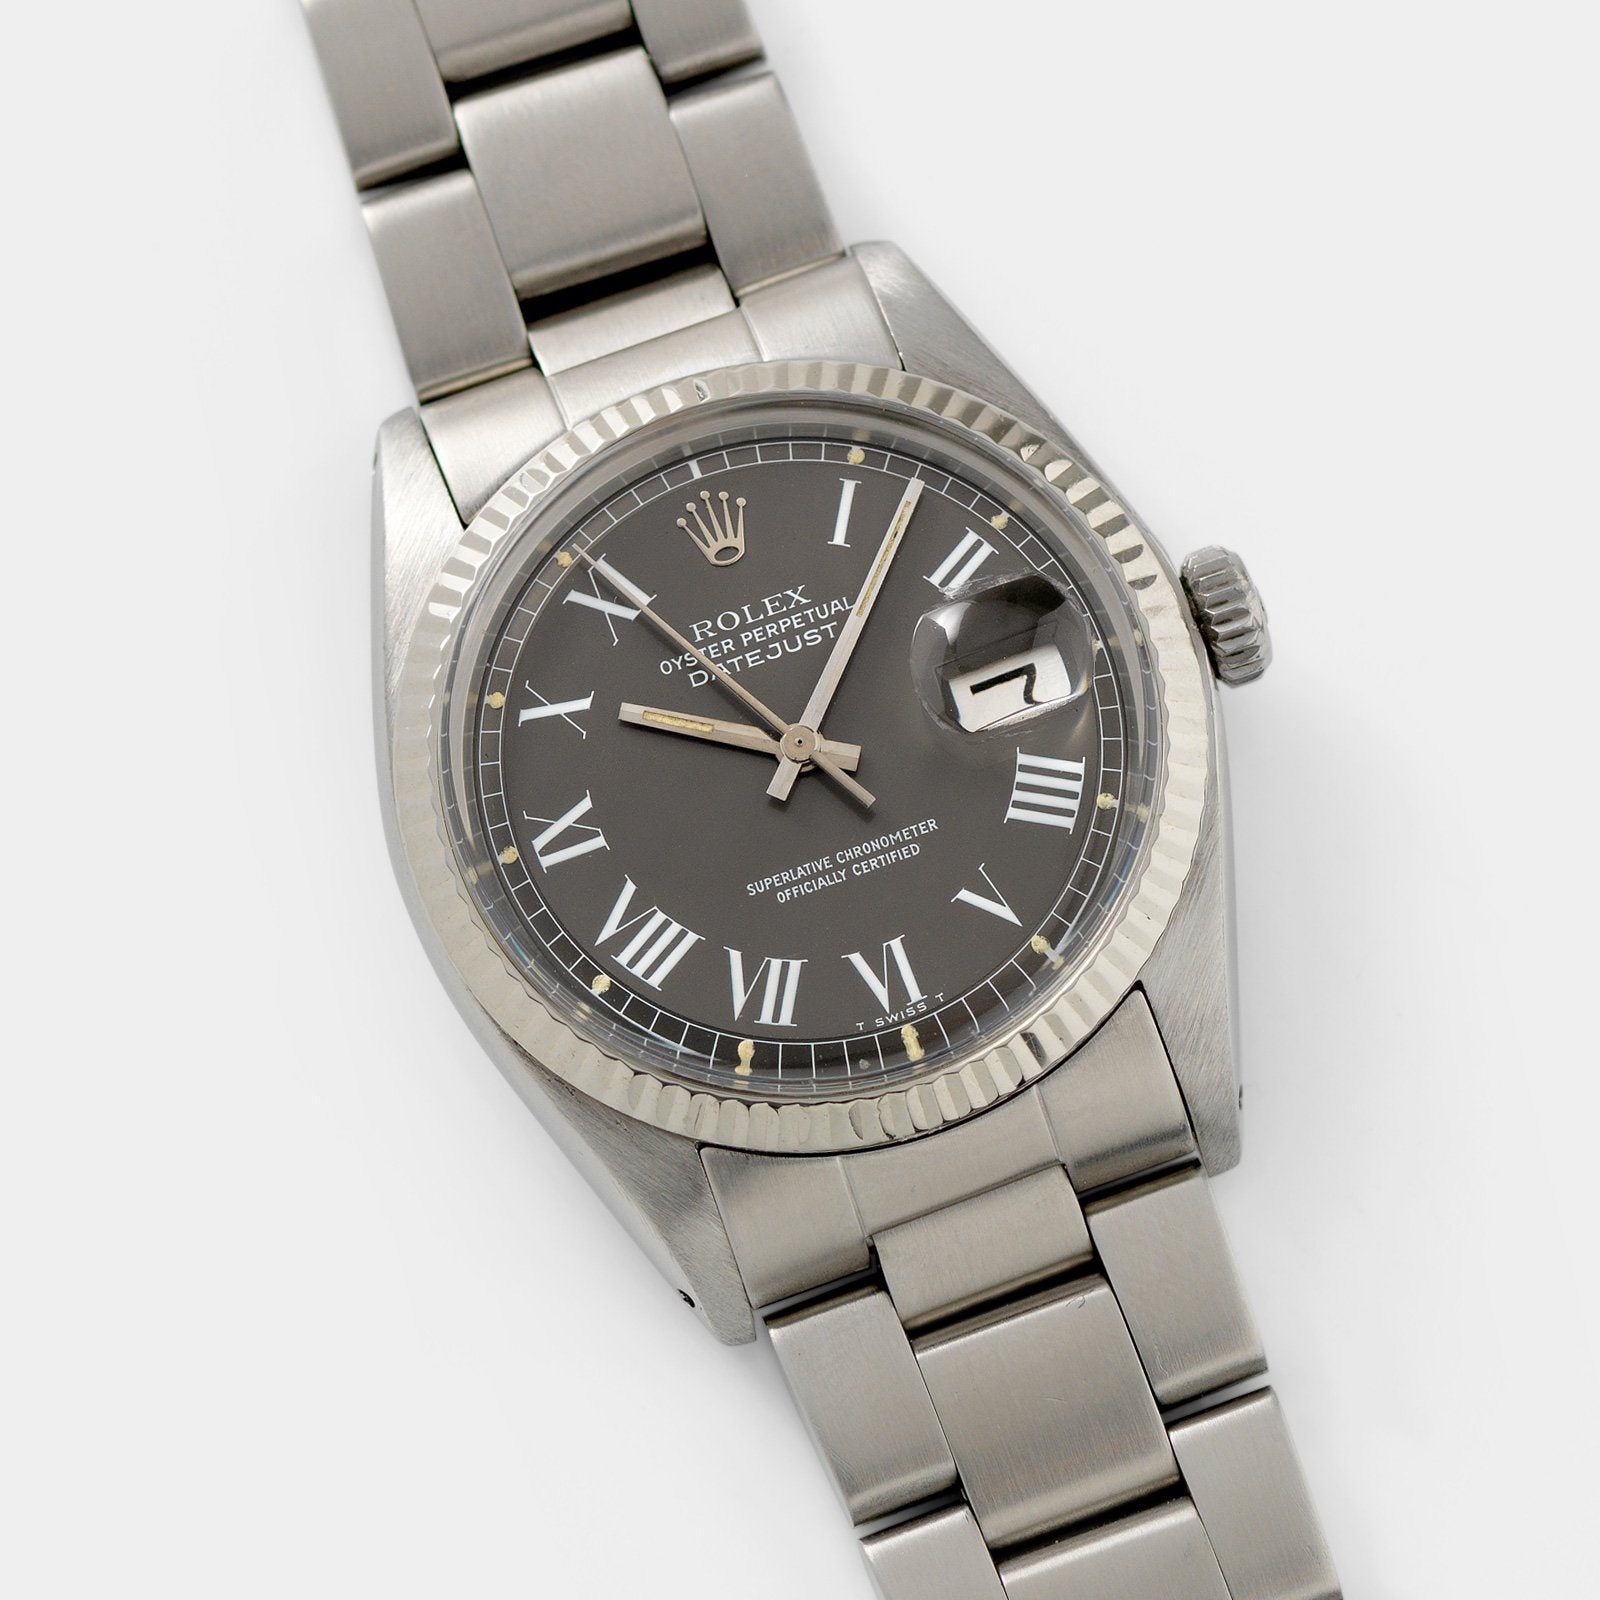 Rolex Datejust Reference 1601 Grey Buckley Dial